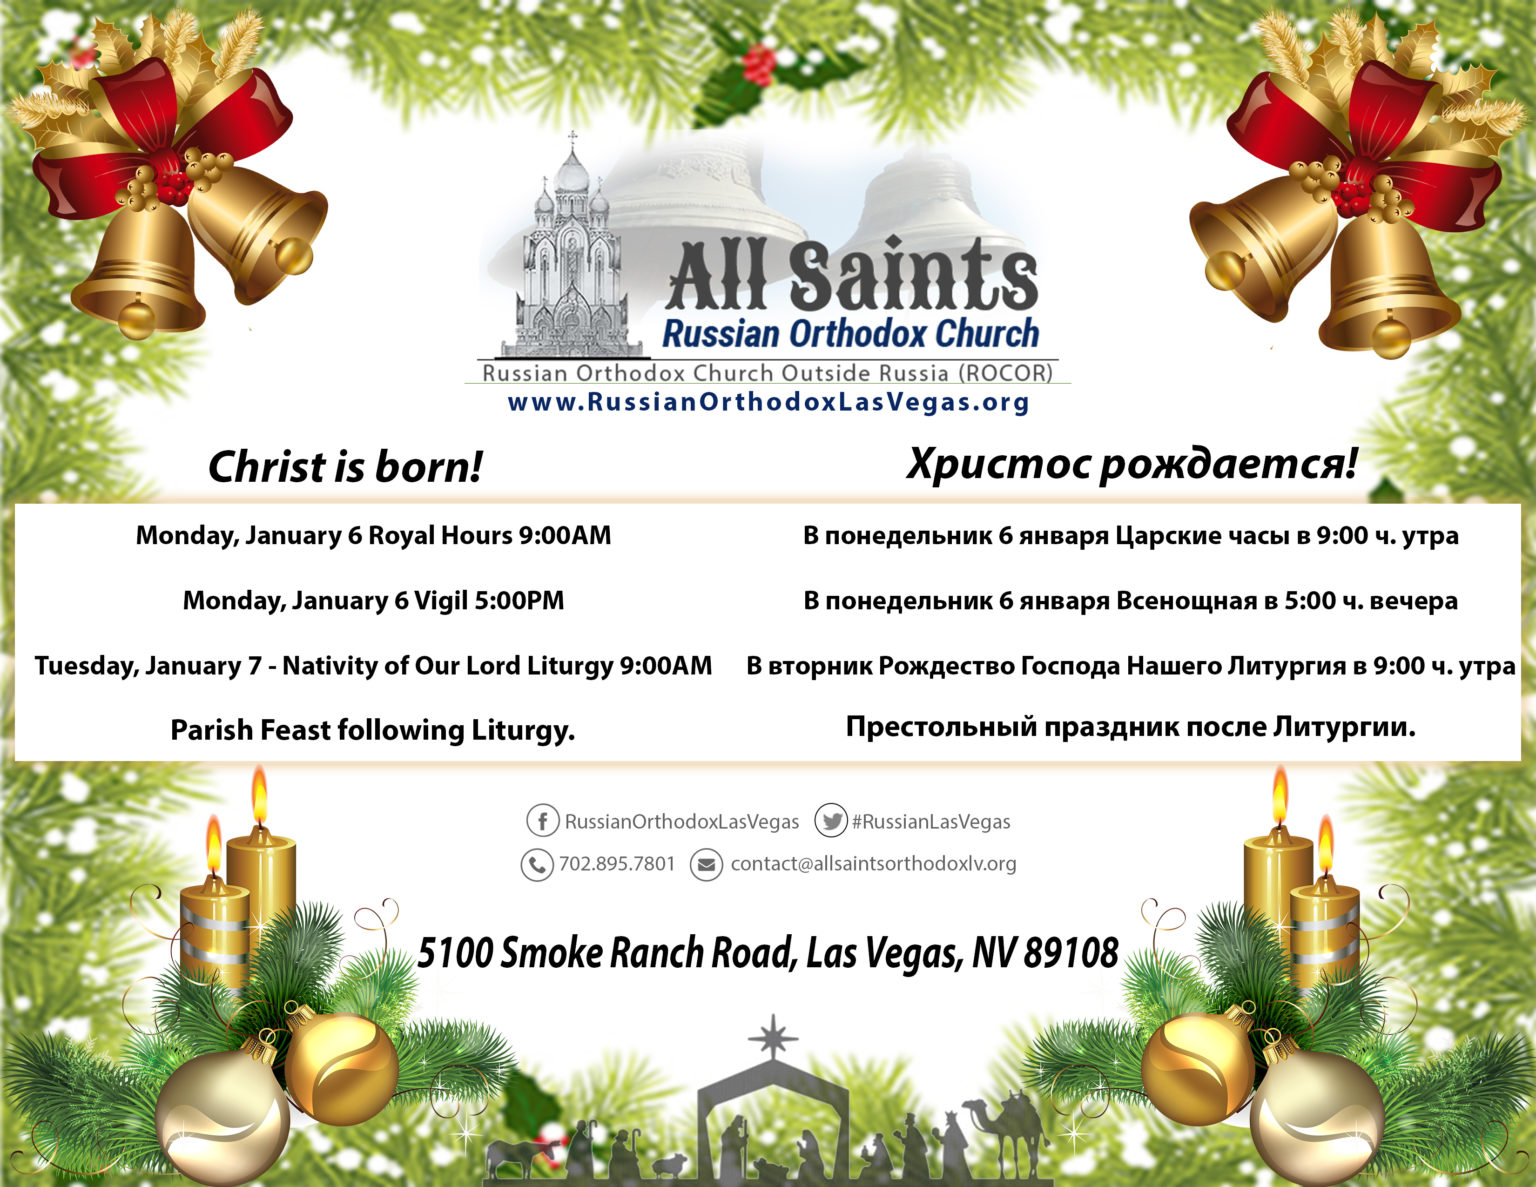 The Nativity schedule at the All Saints Russian Orthodox Church in Las Vegas, NV